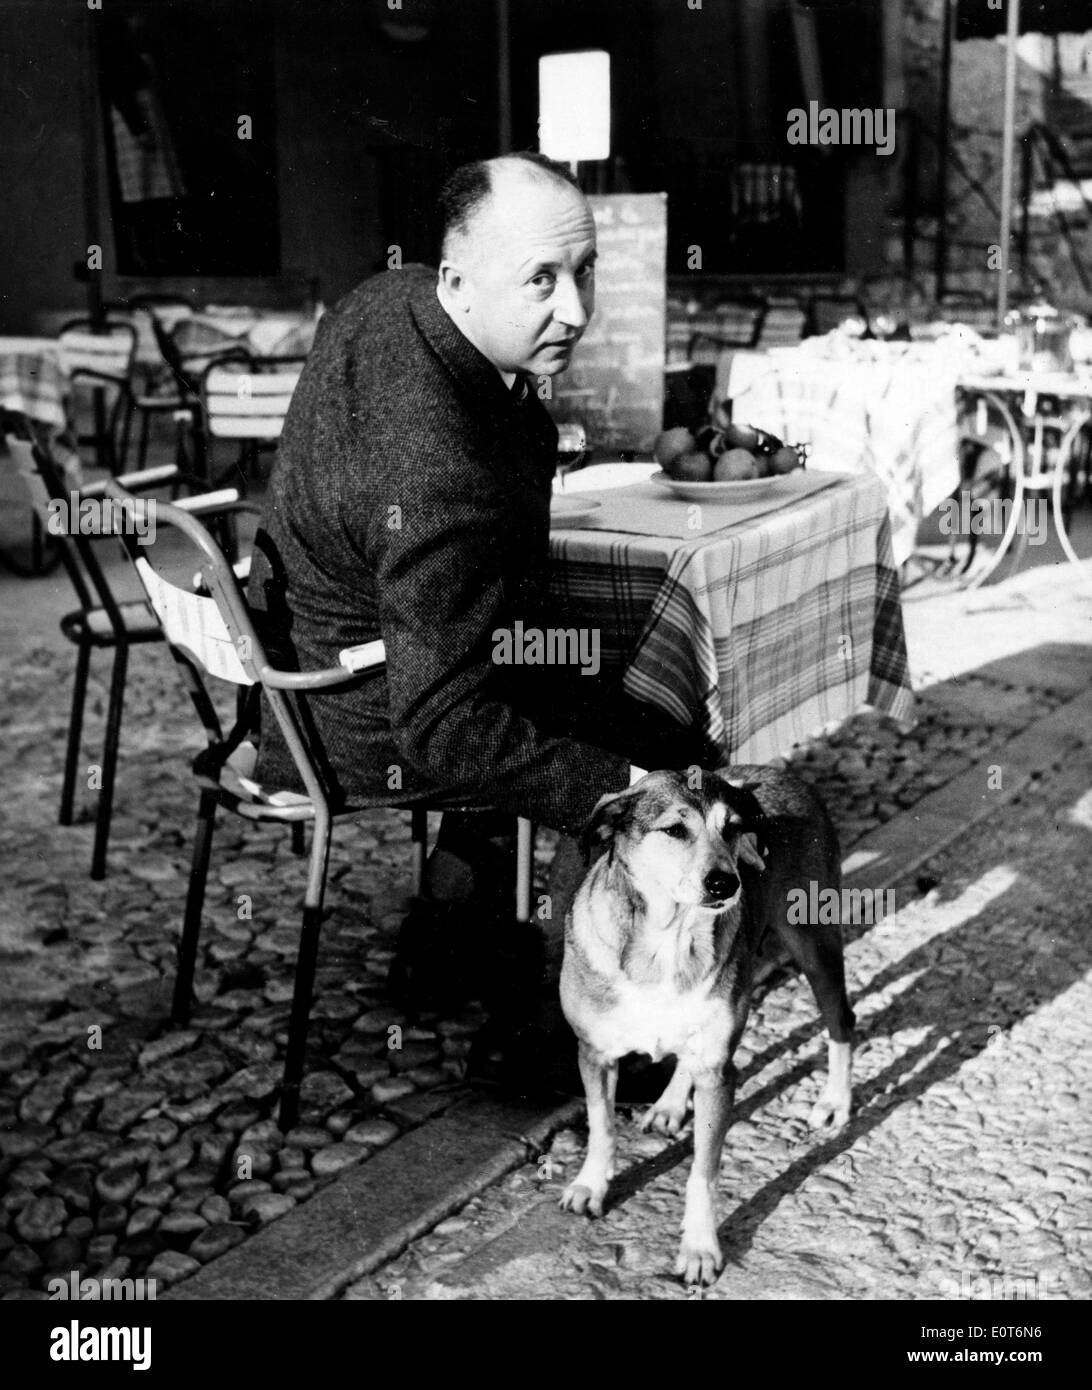 Fashion designer Christian Dior at a cafe with his dog Stock Photo